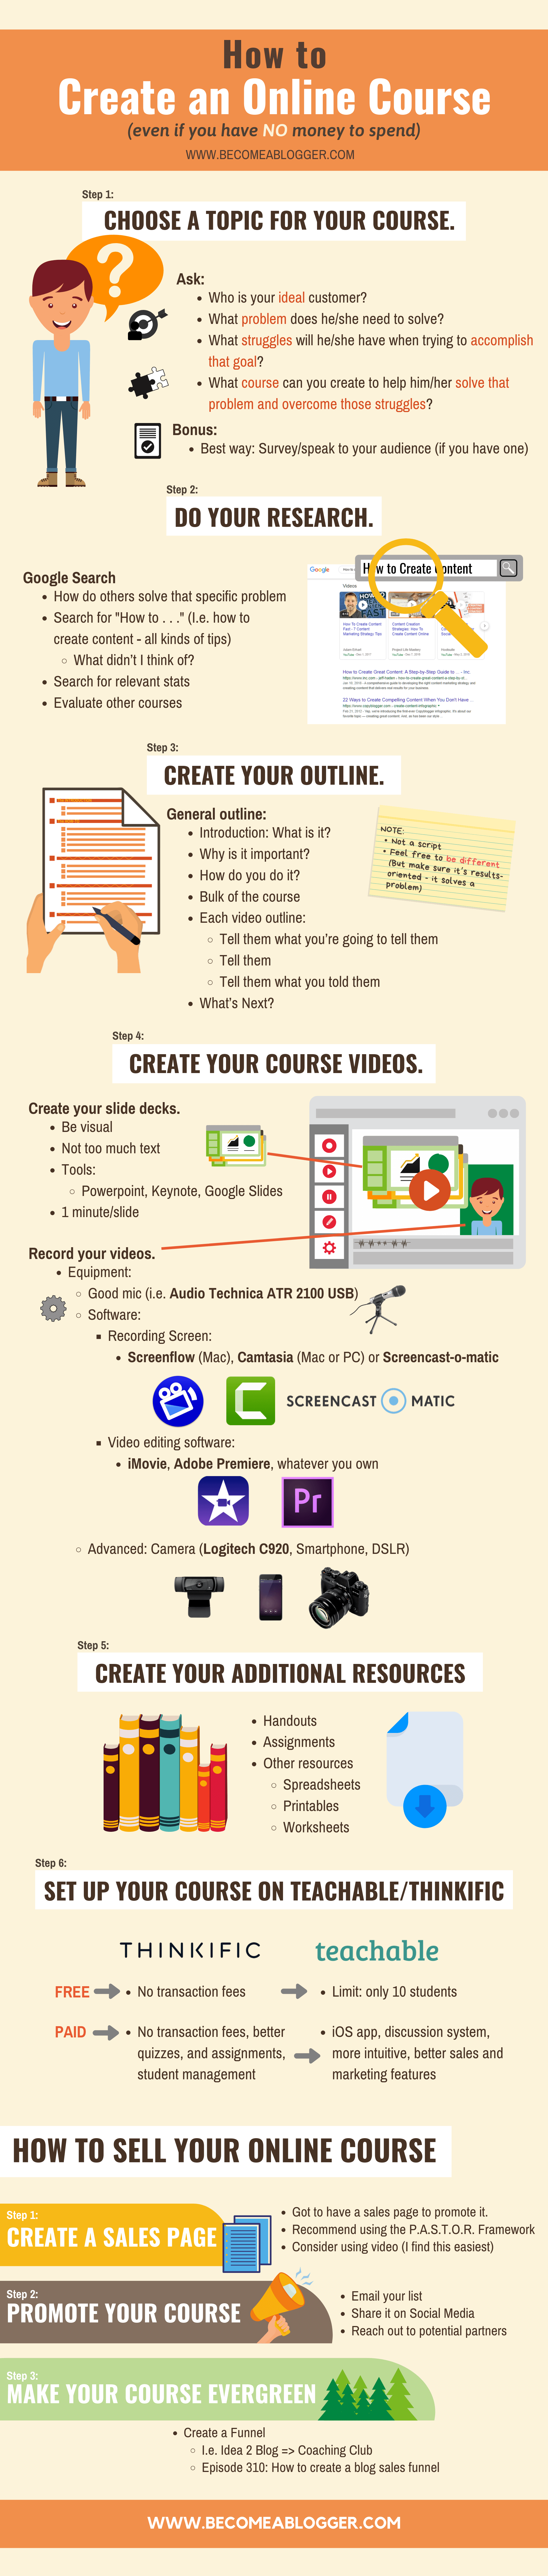 Create Online Course Infographic